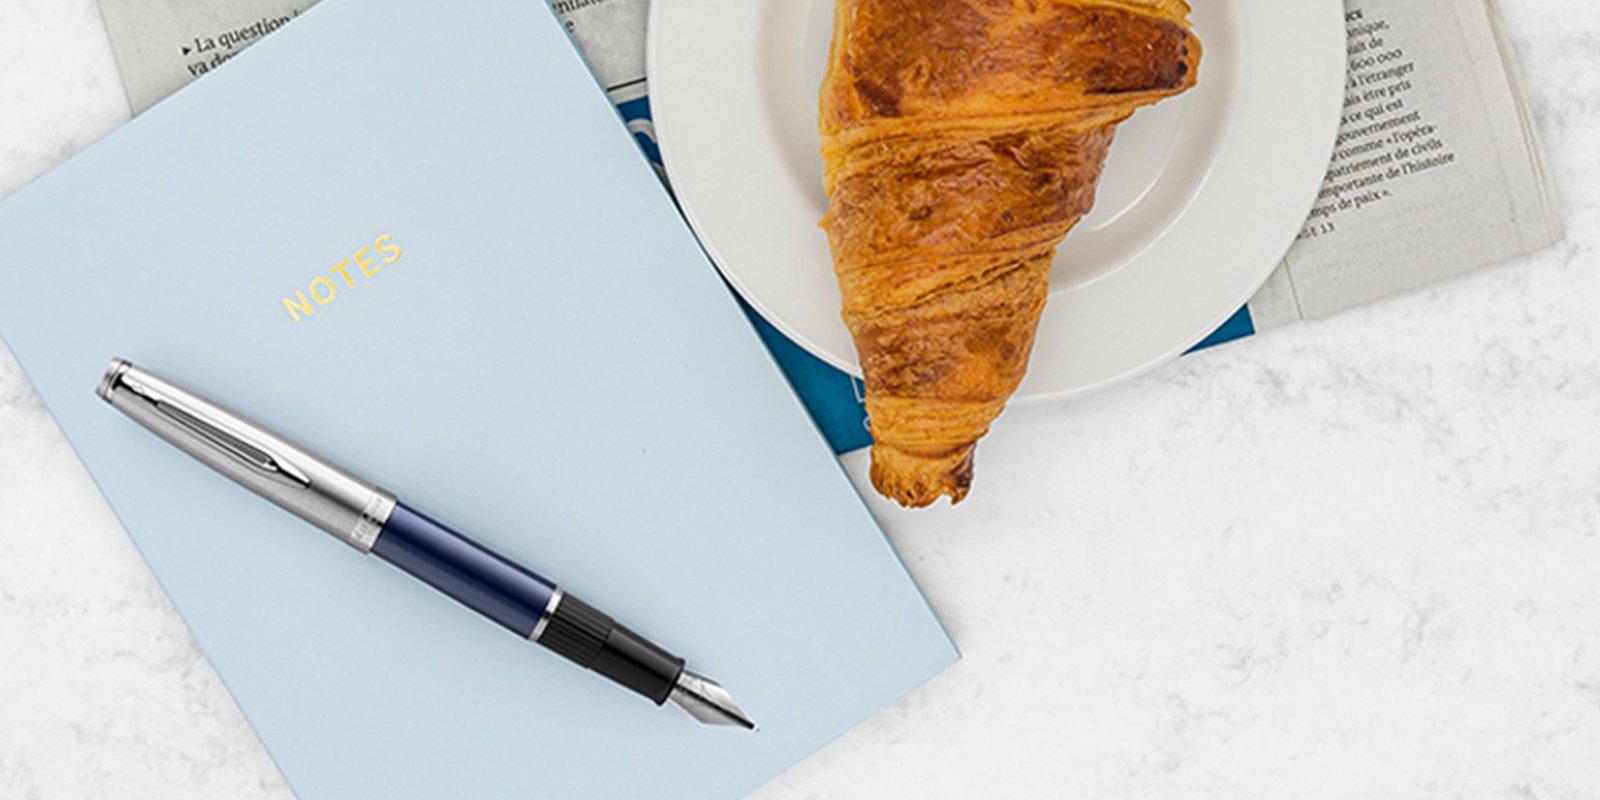 An Embleme fountain pen with chrome trim laid on a notebook next to a croissant, cup of coffee and newspaper.